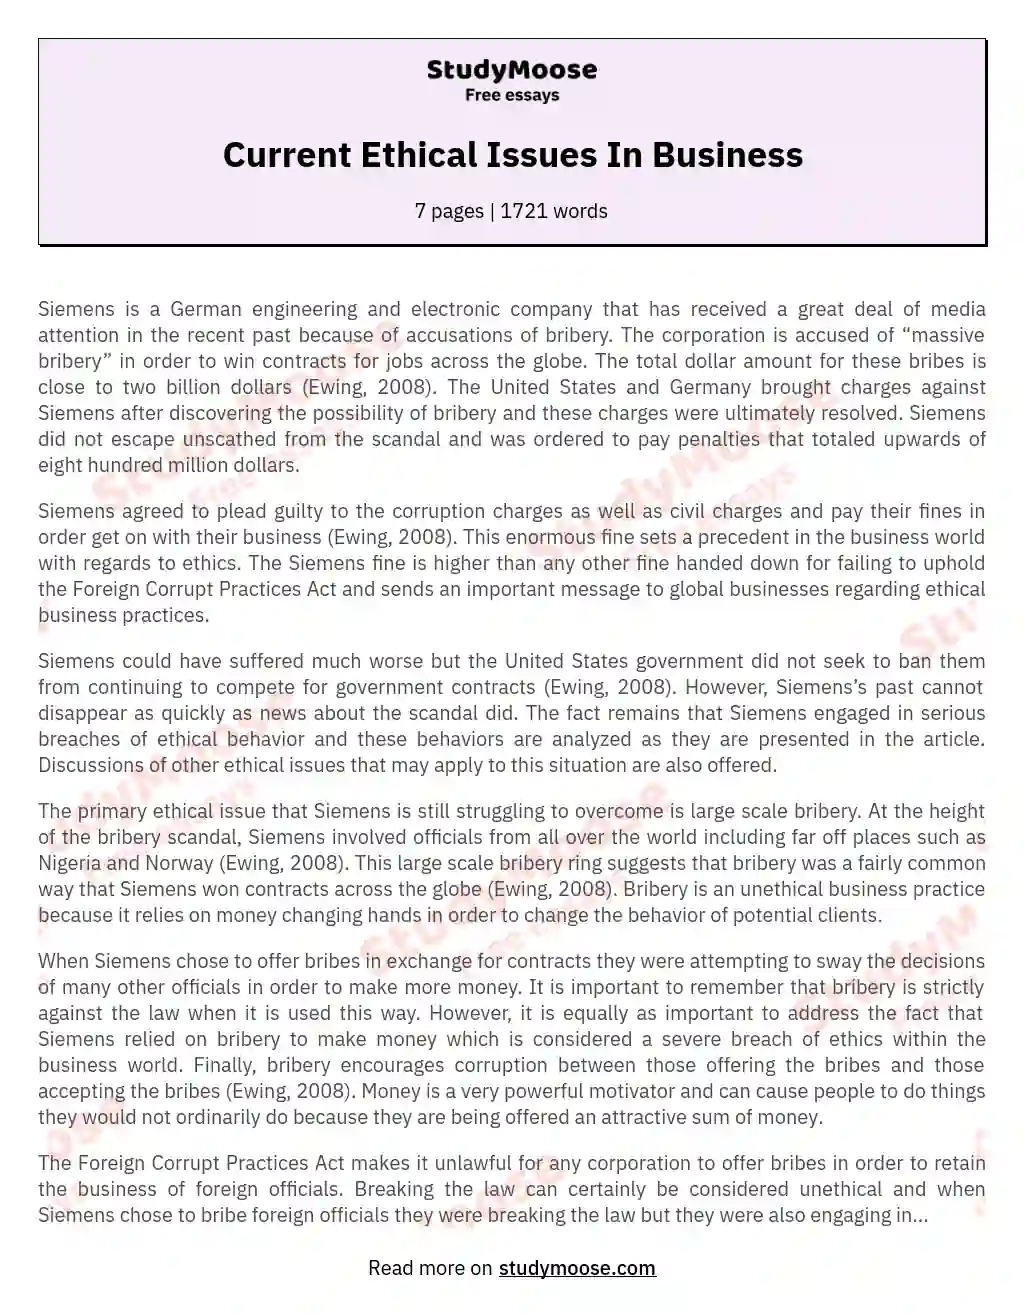 Current Ethical Issues In Business essay